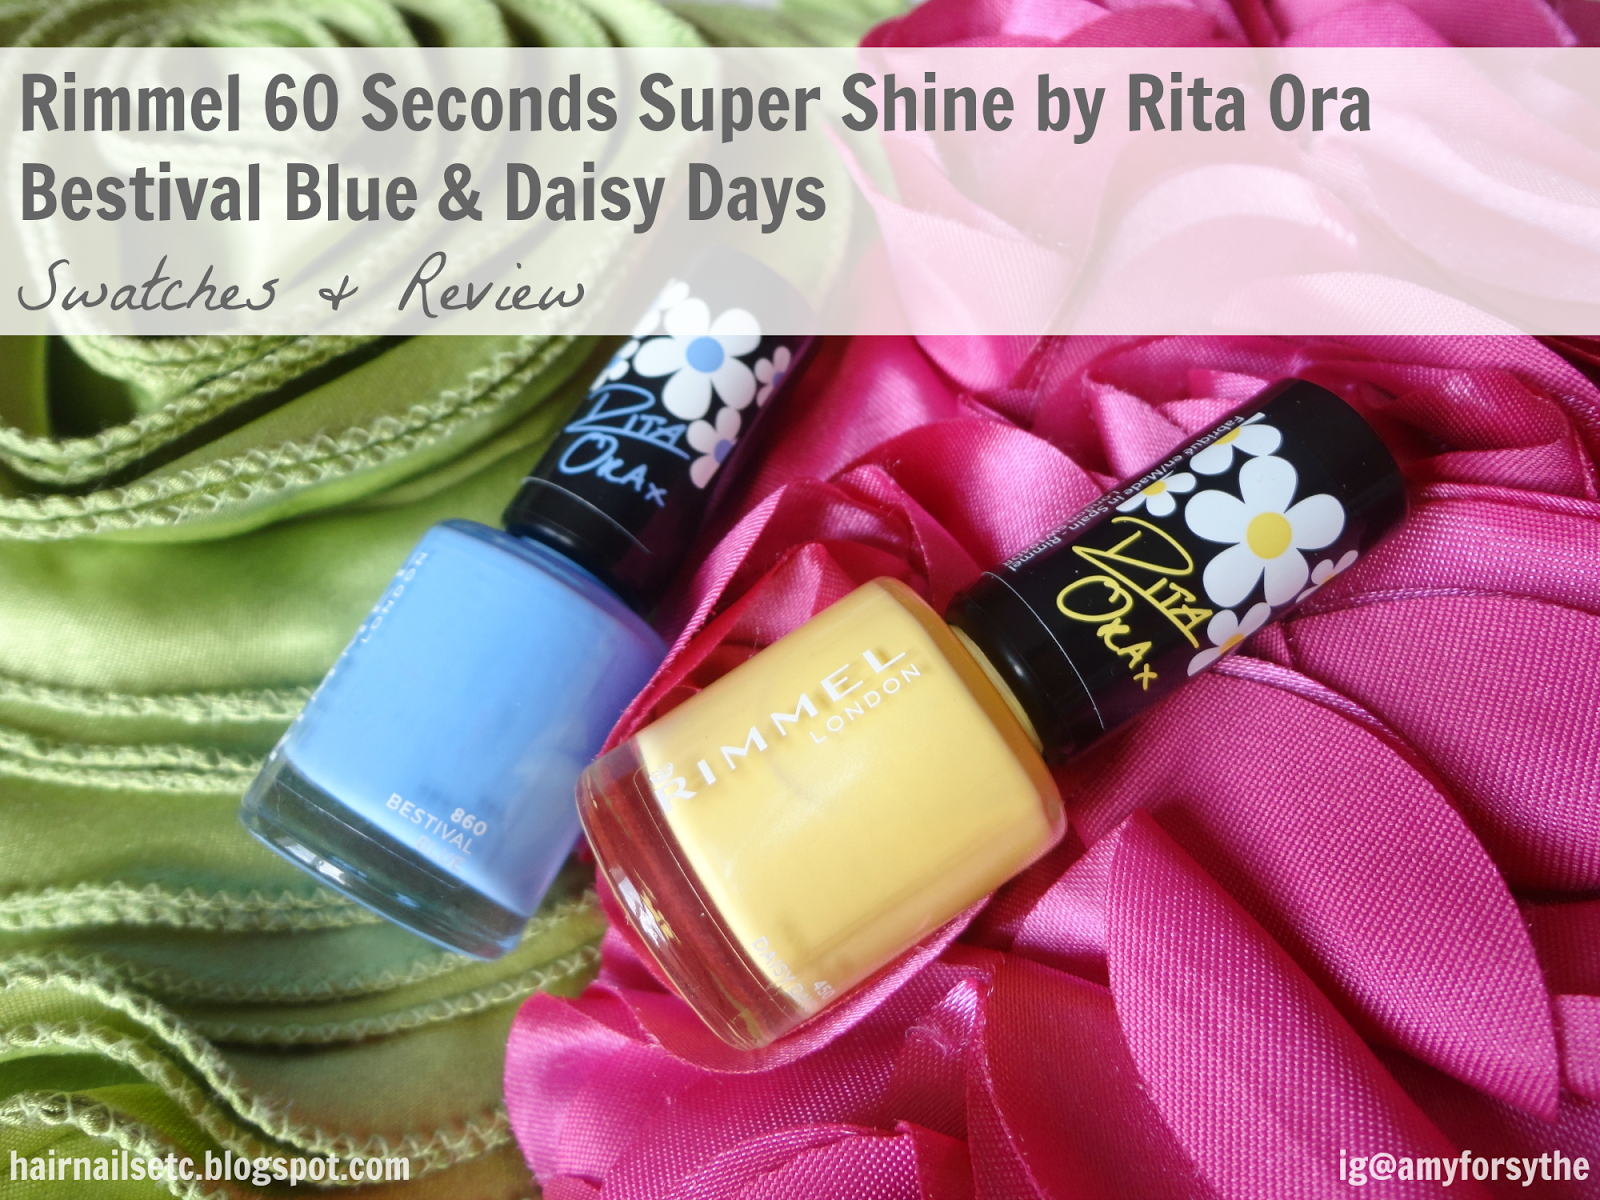 Rimmel 60 Seconds Super Shine Nail Polish Collection by Rita Ora Swatches and Review - hairnailsetc.blogspot.co.uk / instagram.com/amyforsythe